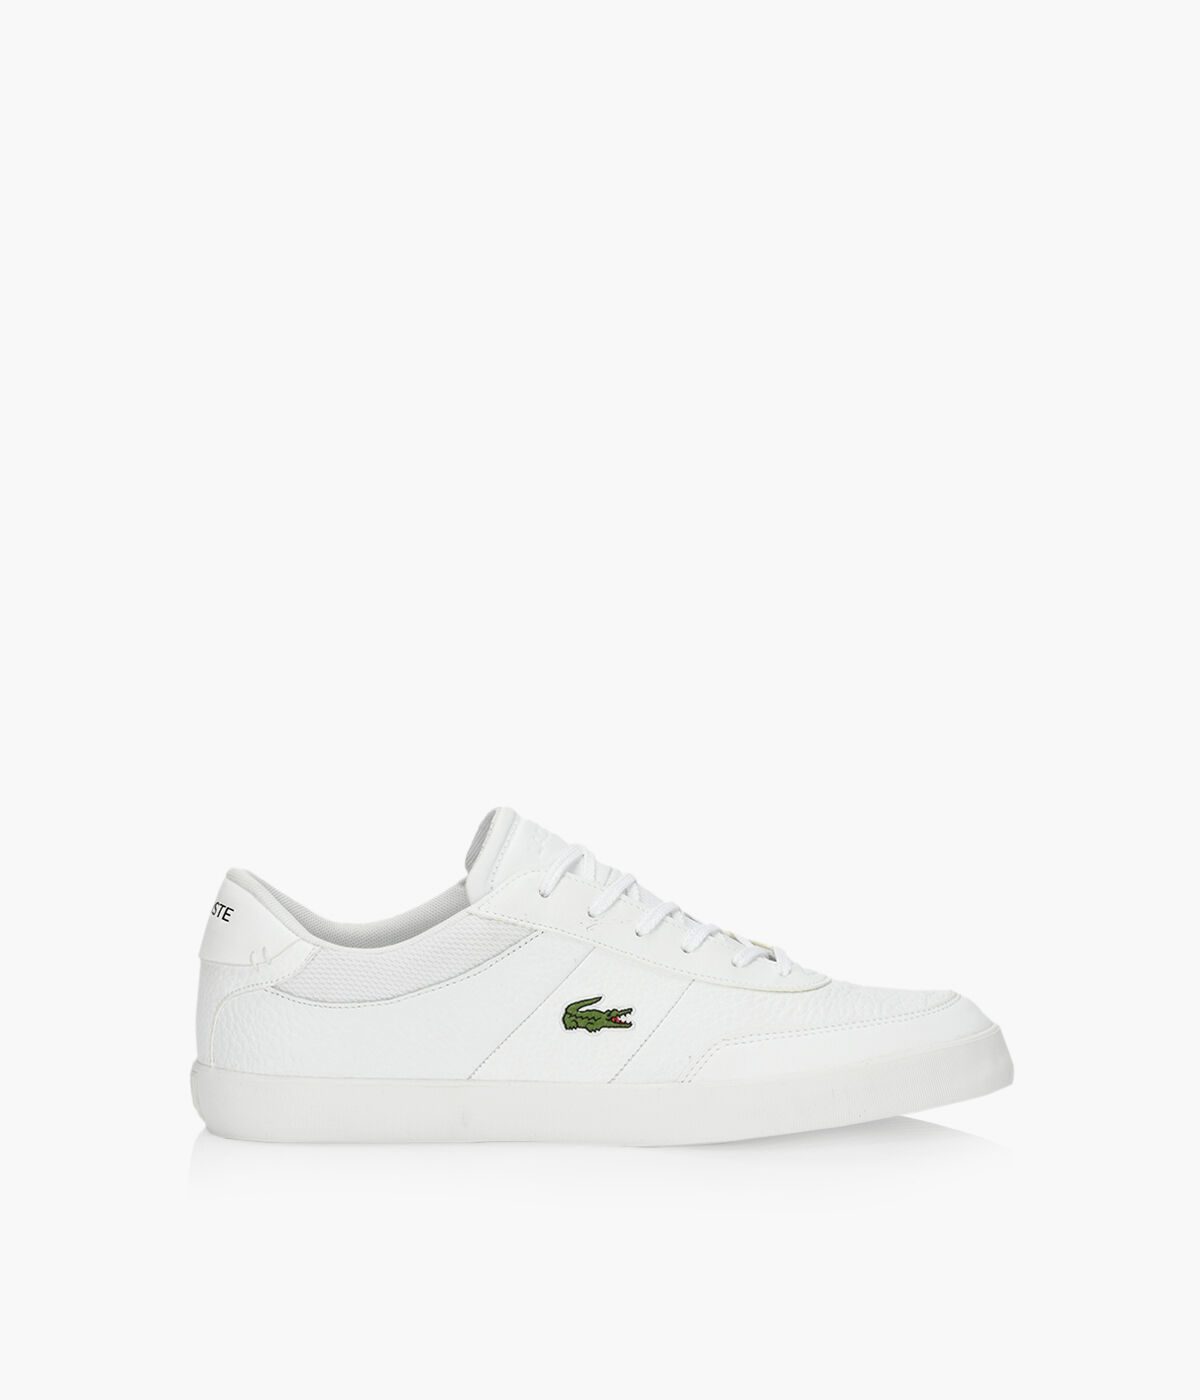 lacoste shoes true to size